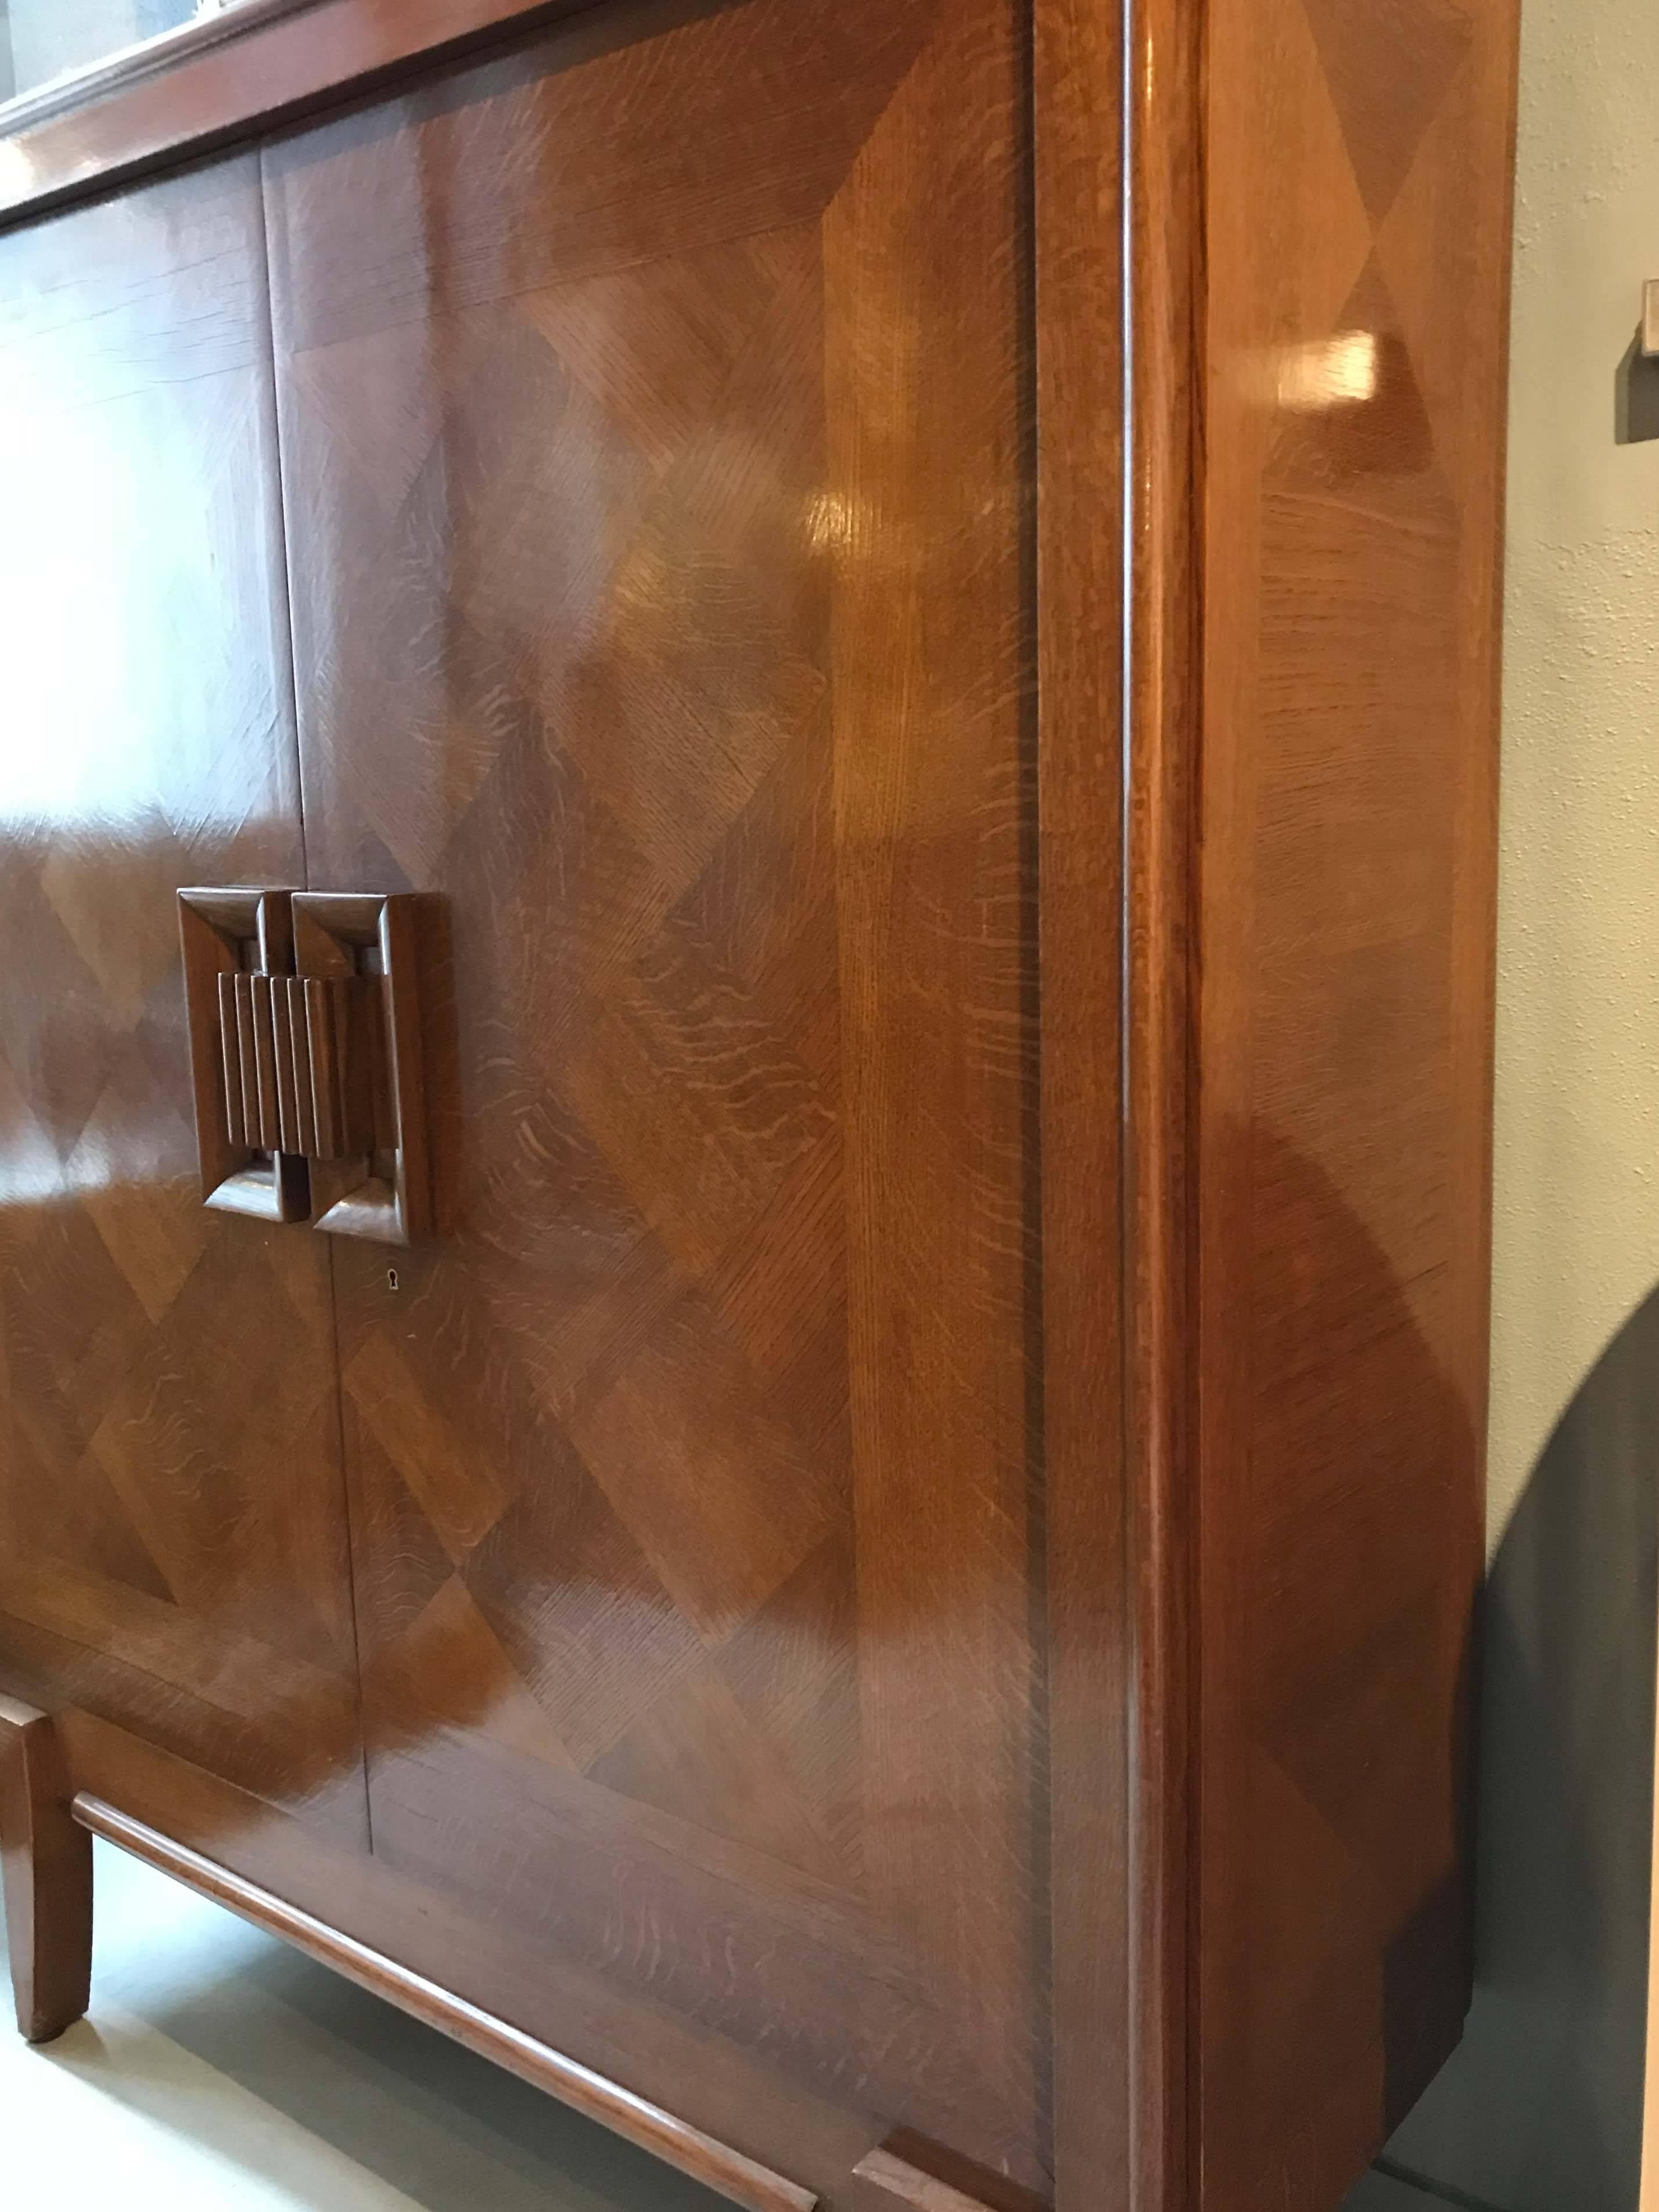 A beautiful art deco cabinet of exceptional quality. Geometric marquetry covers the exterior surfaces with double doors that open to reveal an open cabinet.

Restored circa 2000, condition shows minor wear consistent with use since. Back has a hole